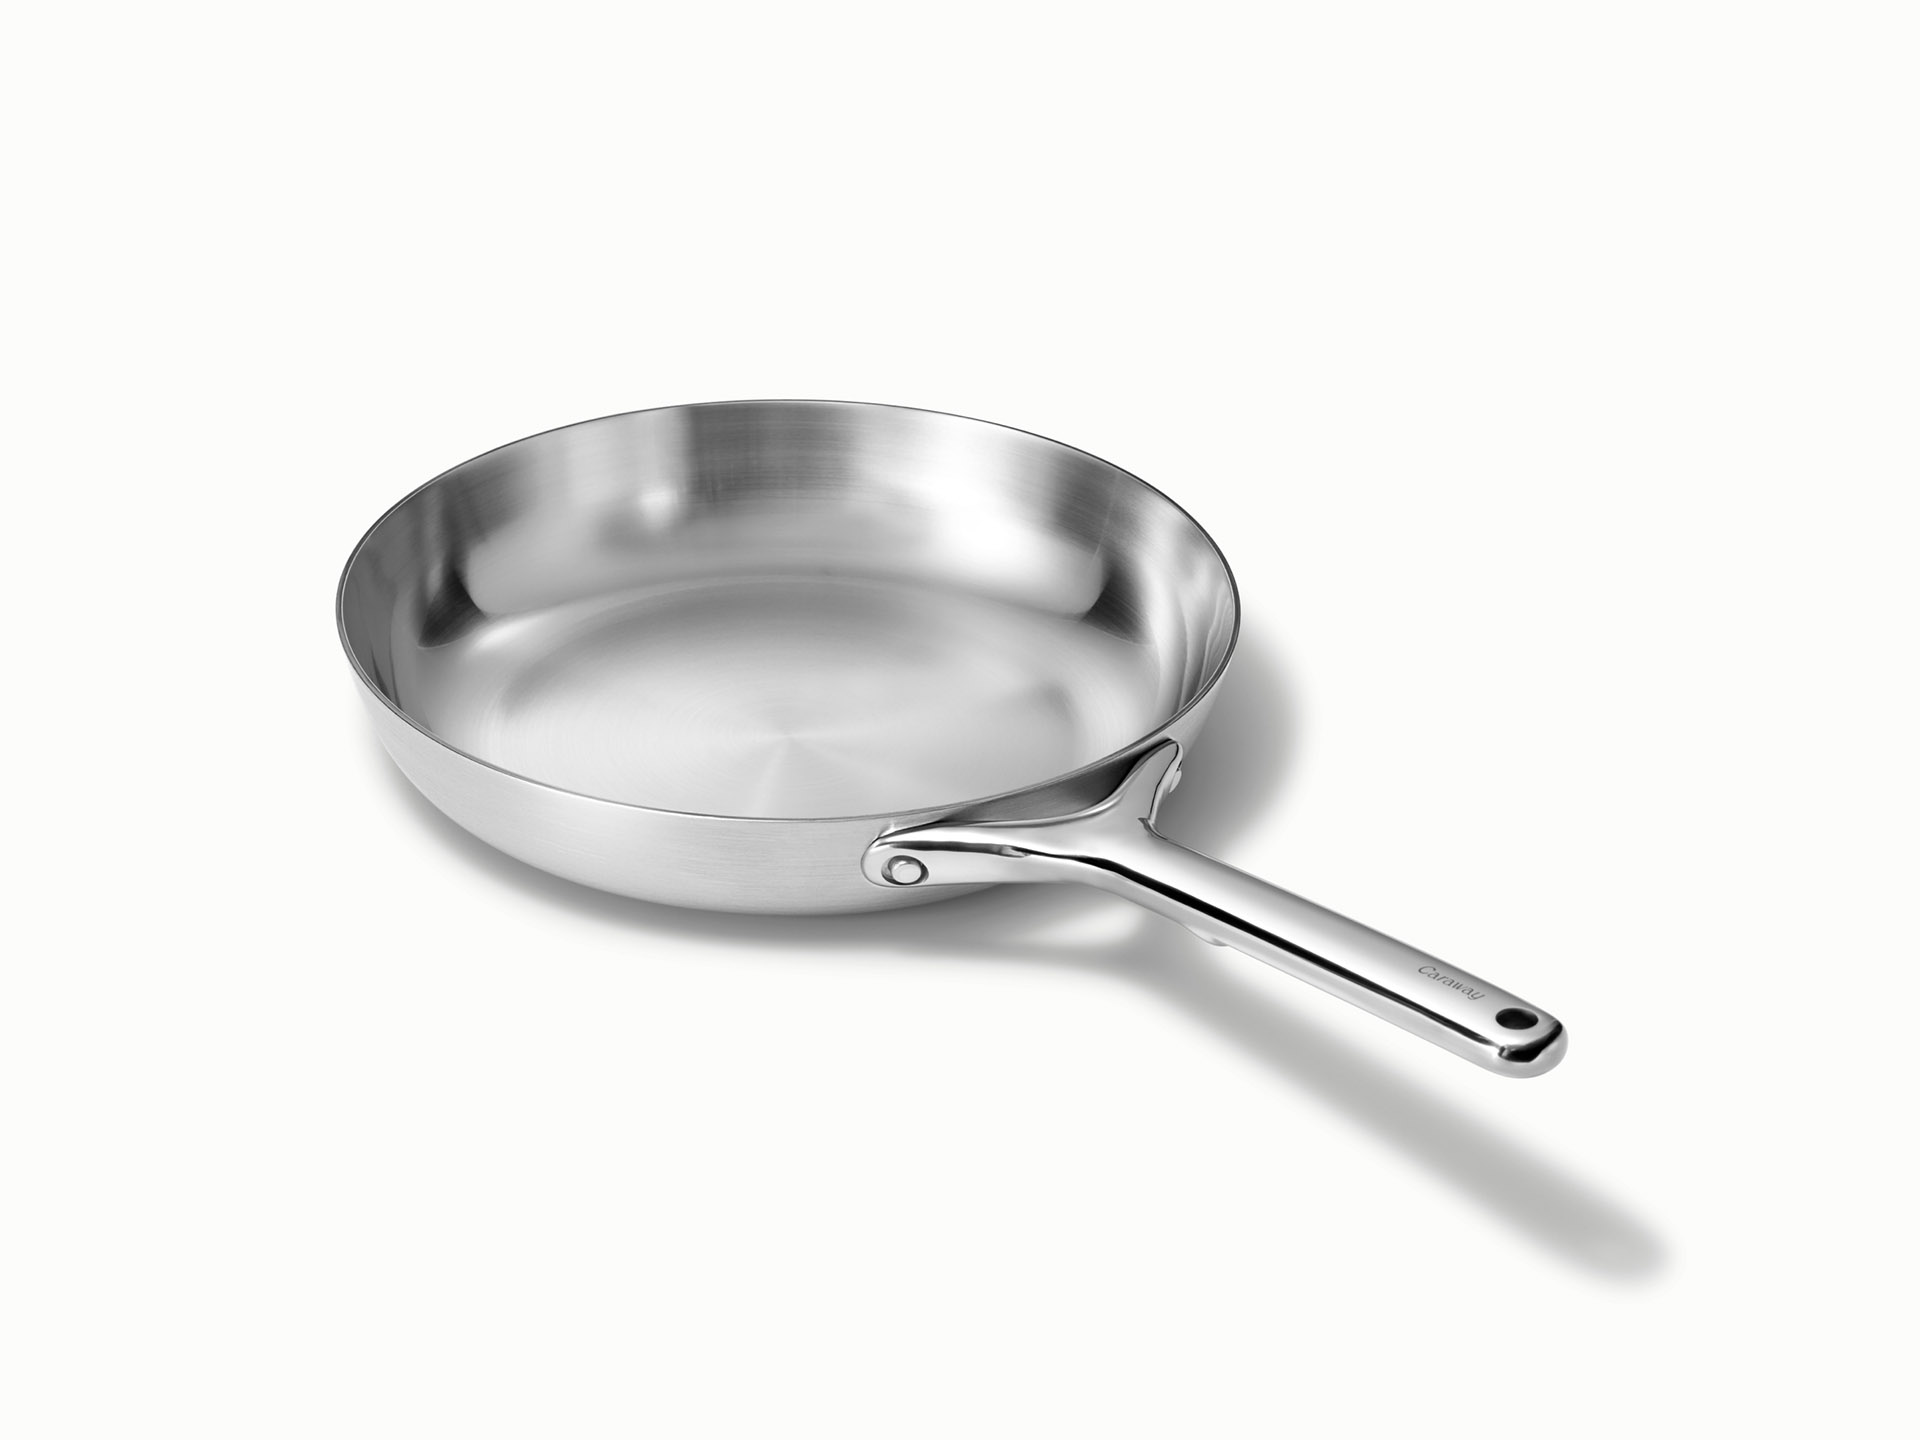 Stainless Steel Fry Pan, Fully Clad Stainless Steel Frying Pan